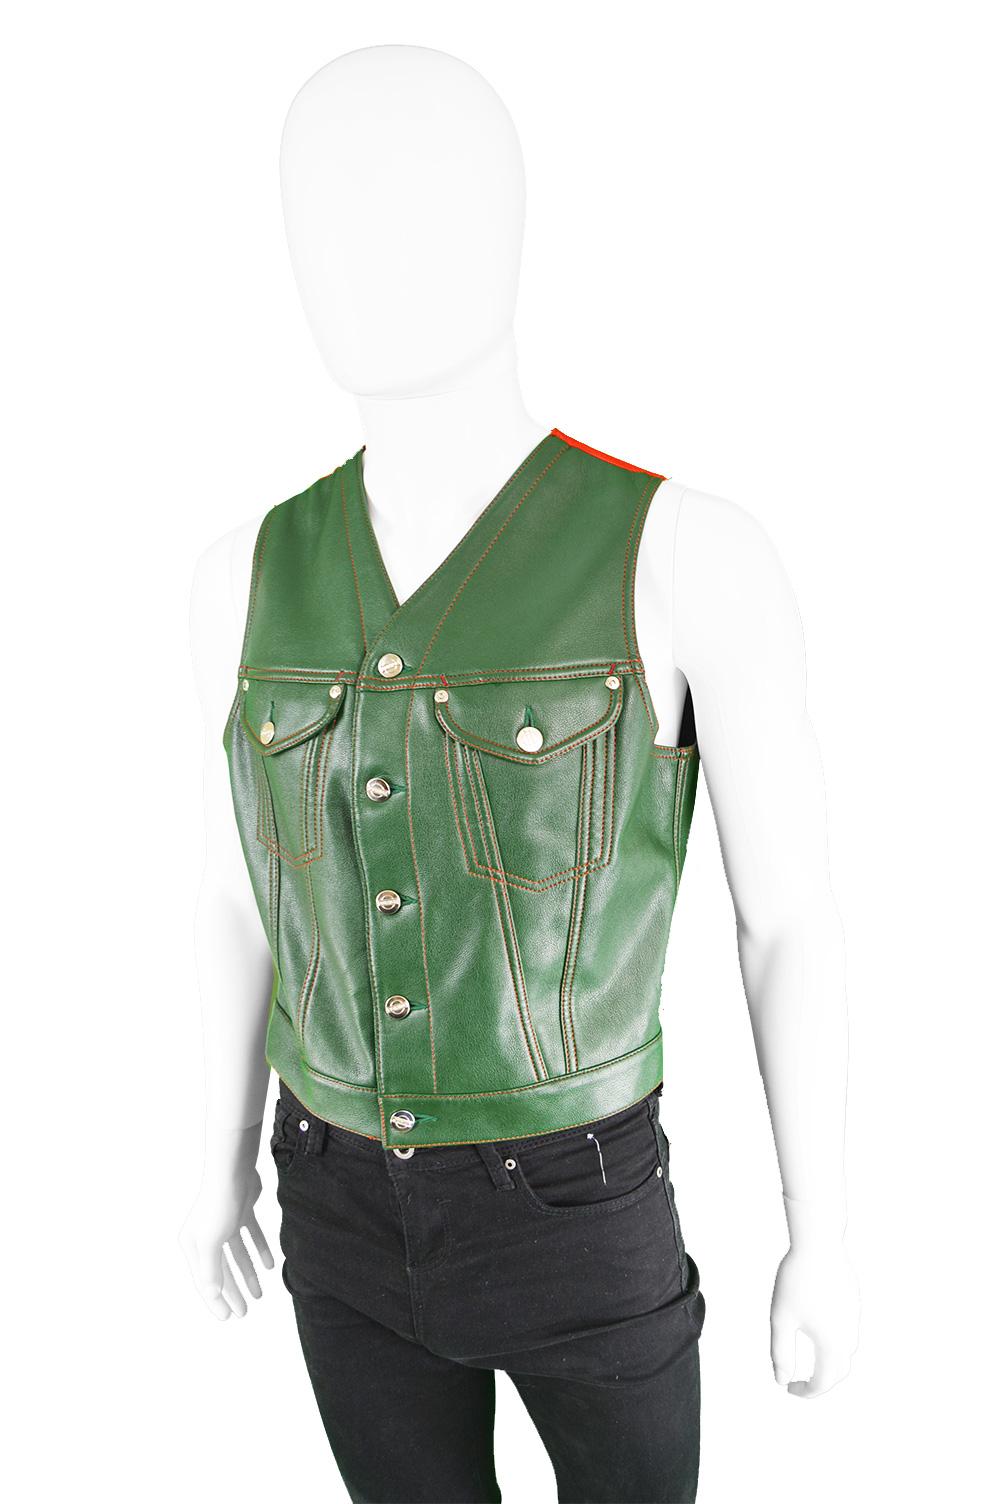 Jean Paul Gaultier Men's Green Faux Leather Vest with Red Taffeta Back, 1980s For Sale 1